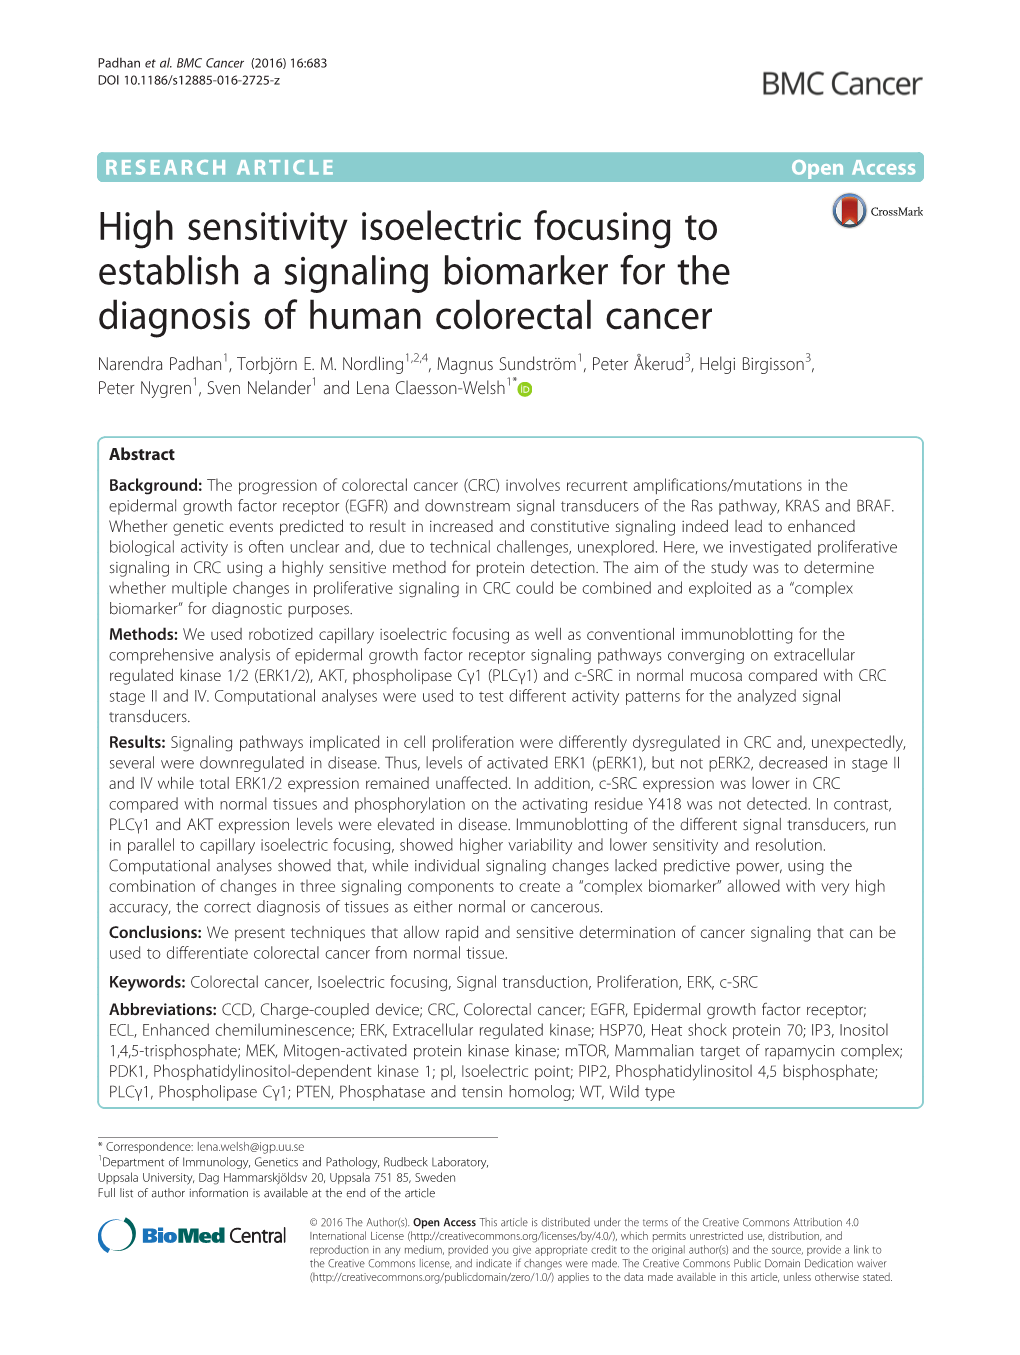 High Sensitivity Isoelectric Focusing to Establish a Signaling Biomarker for the Diagnosis of Human Colorectal Cancer Narendra Padhan1, Torbjörn E